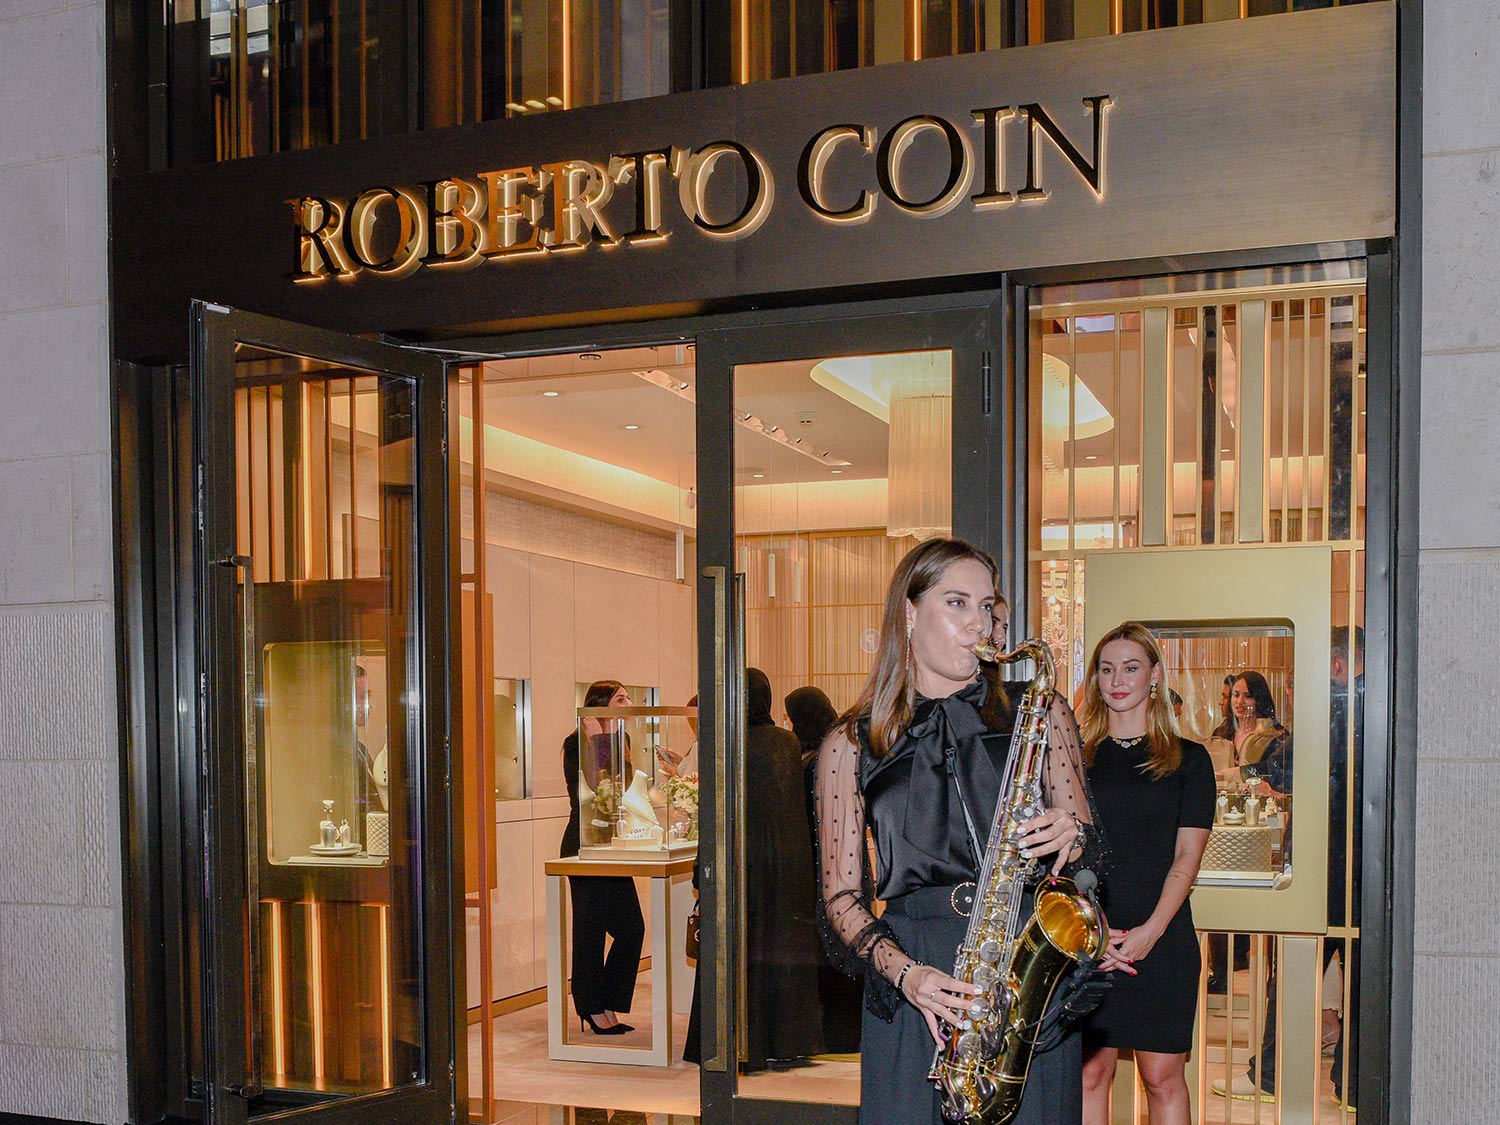 ROBERTO COIN OPENS NEW BOUTIQUE IN QATAR